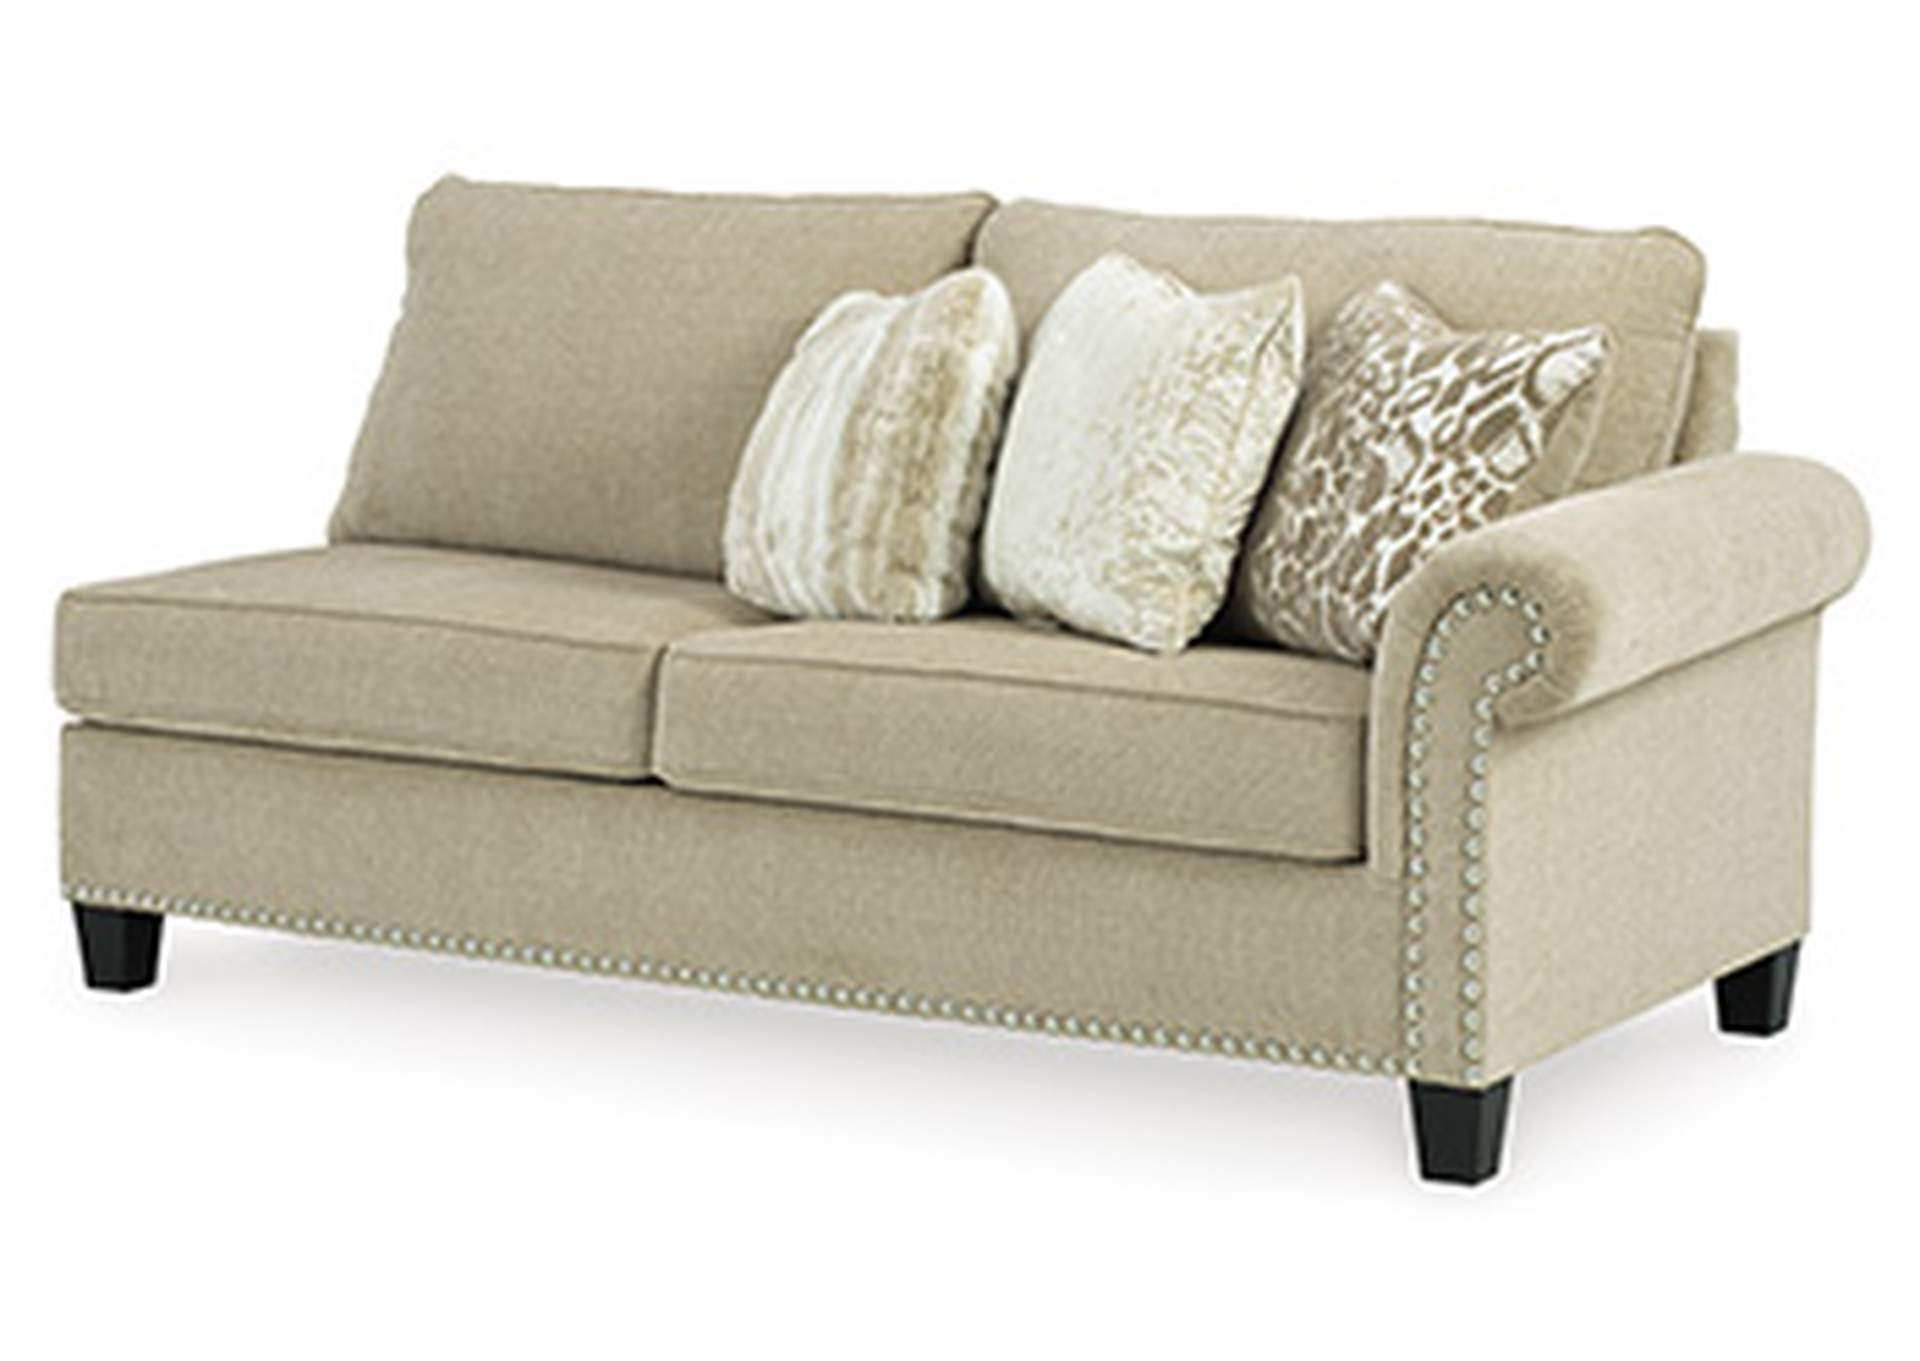 Dovemont Right-Arm Facing Sofa,Signature Design By Ashley